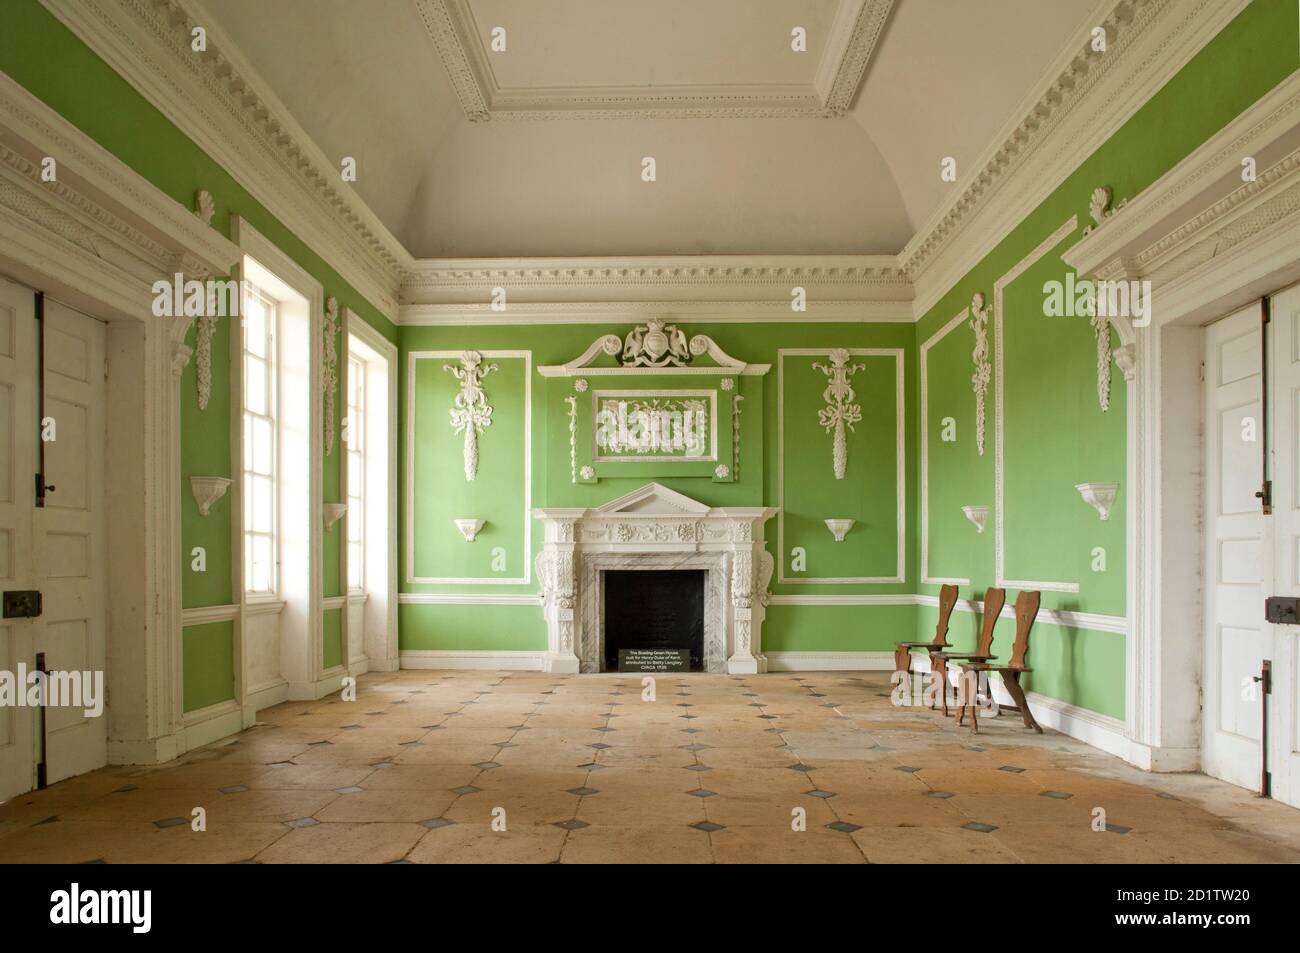 WREST PARK HOUSE AND GARDENS, Bedfordshire. Interior view of the Bowling Green House, looking towards the fireplace. Stock Photo